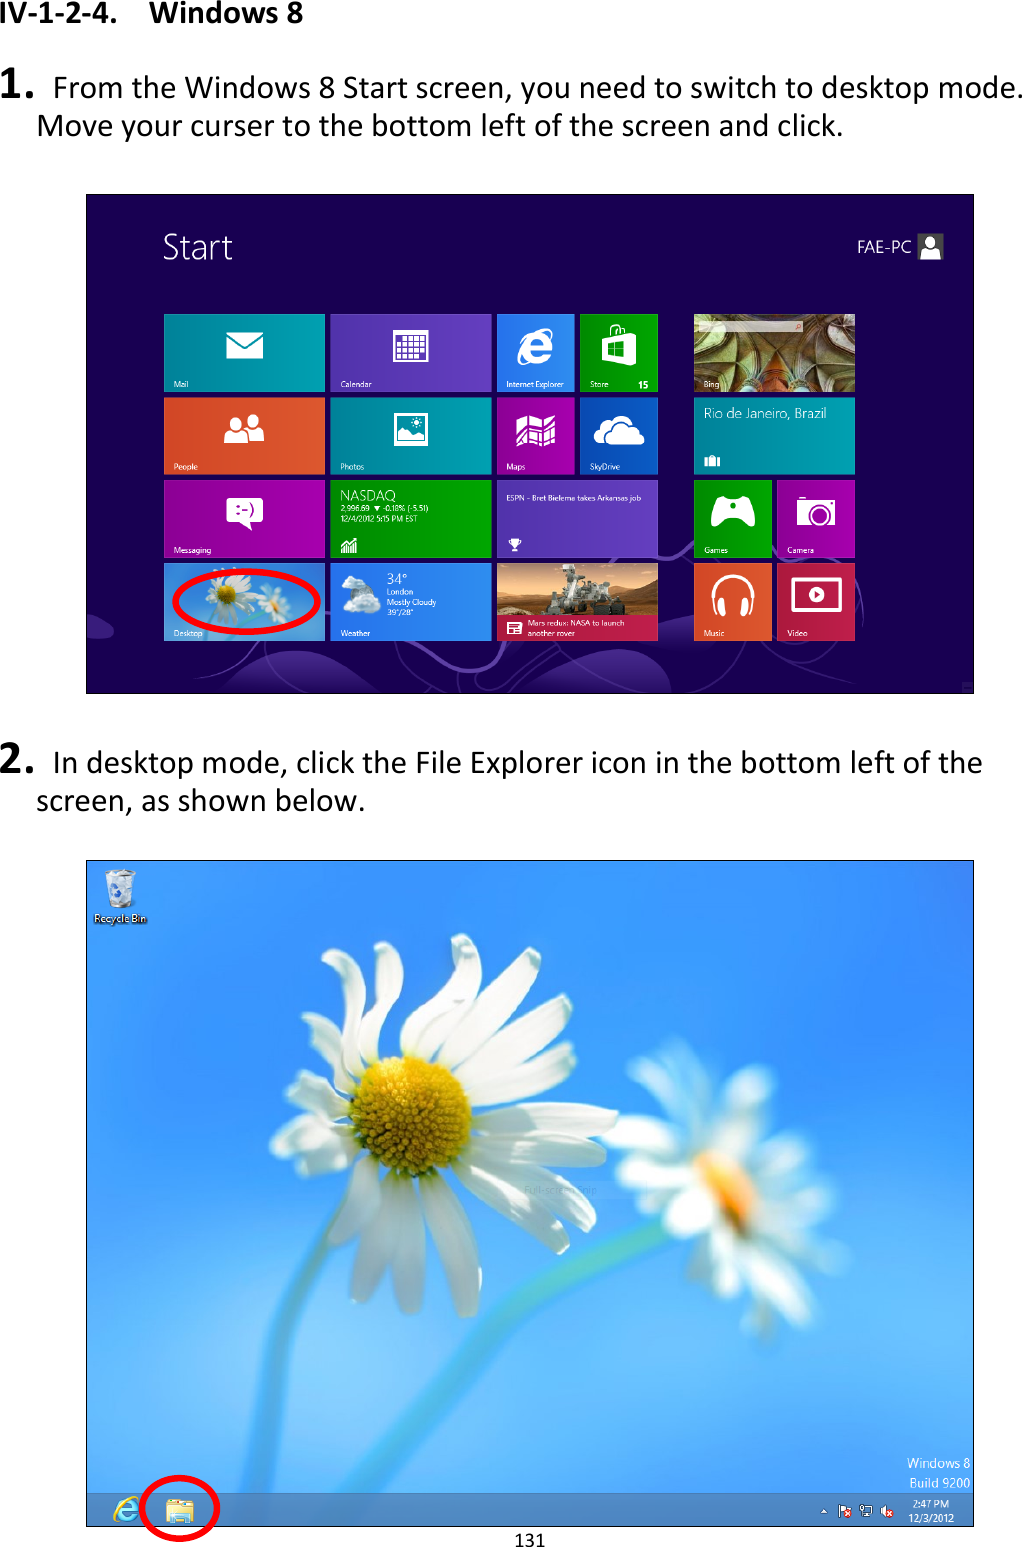 131  IV-1-2-4.  Windows 8  1.   From the Windows 8 Start screen, you need to switch to desktop mode. Move your curser to the bottom left of the screen and click.    2.   In desktop mode, click the File Explorer icon in the bottom left of the screen, as shown below.   